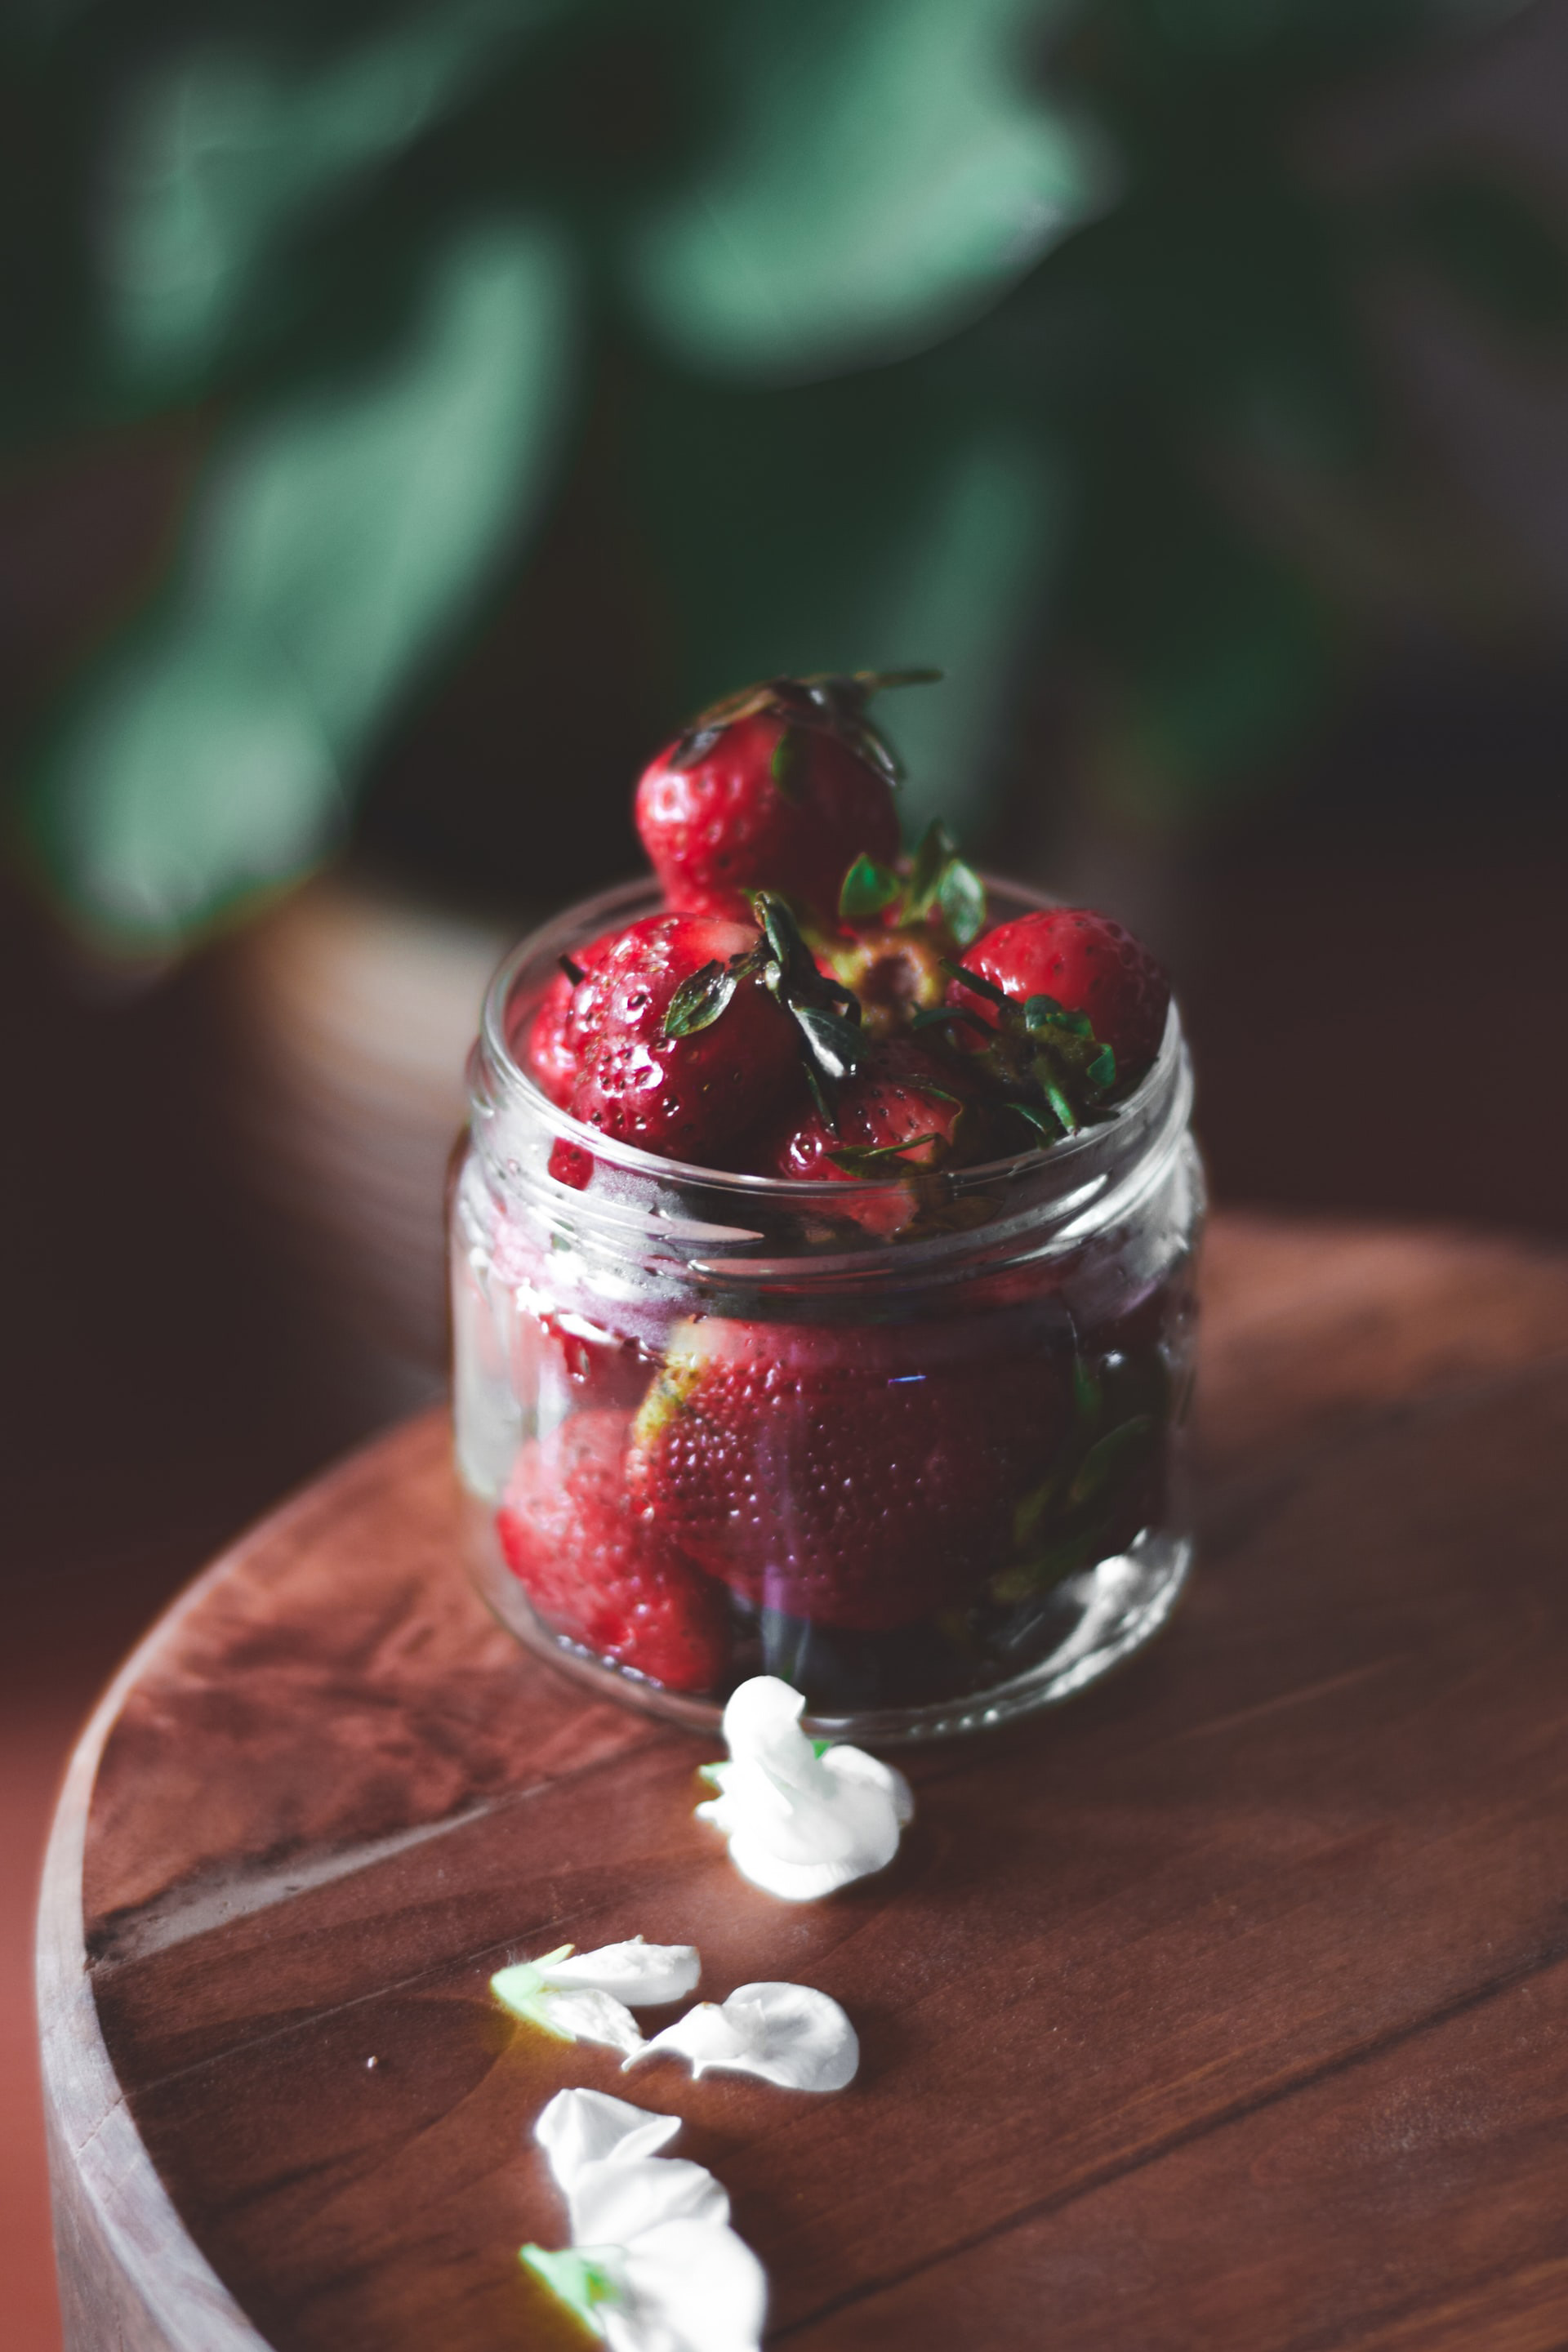 Strawberries in a small jar.